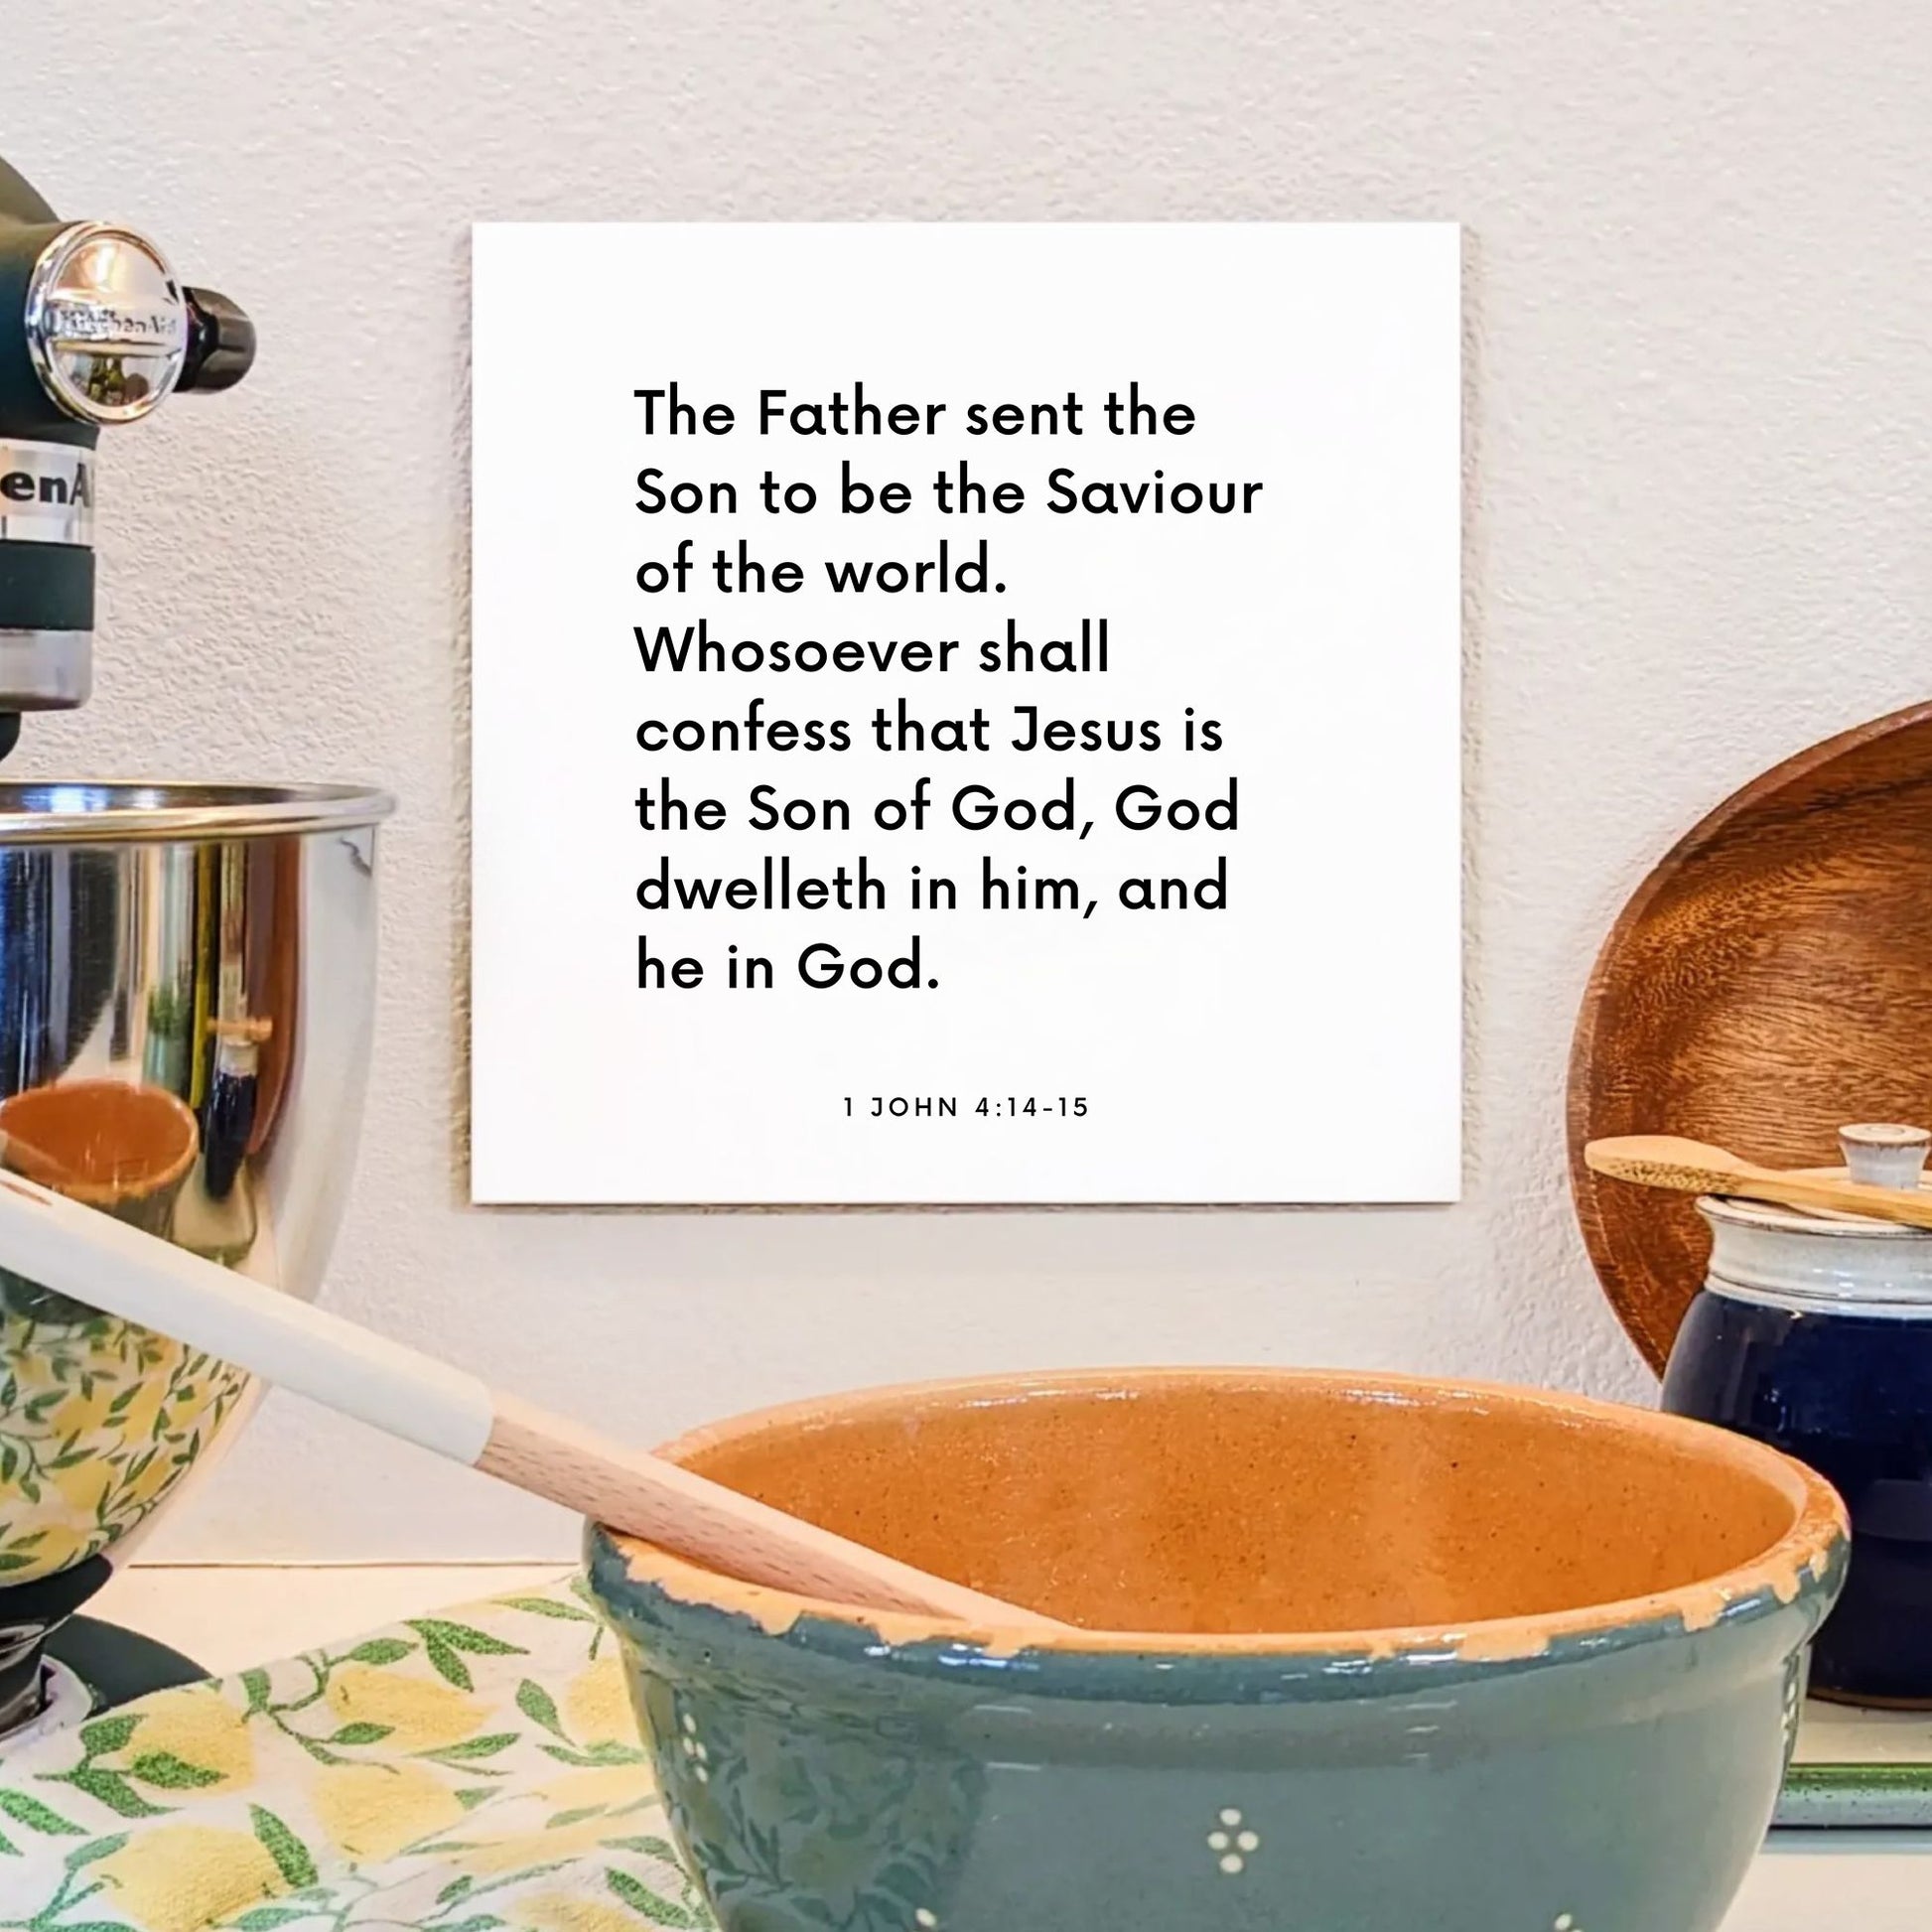 Kitchen mouting of the scripture tile for 1 John 4:14-15 - "Whosoever shall confess that Jesus is the Son"